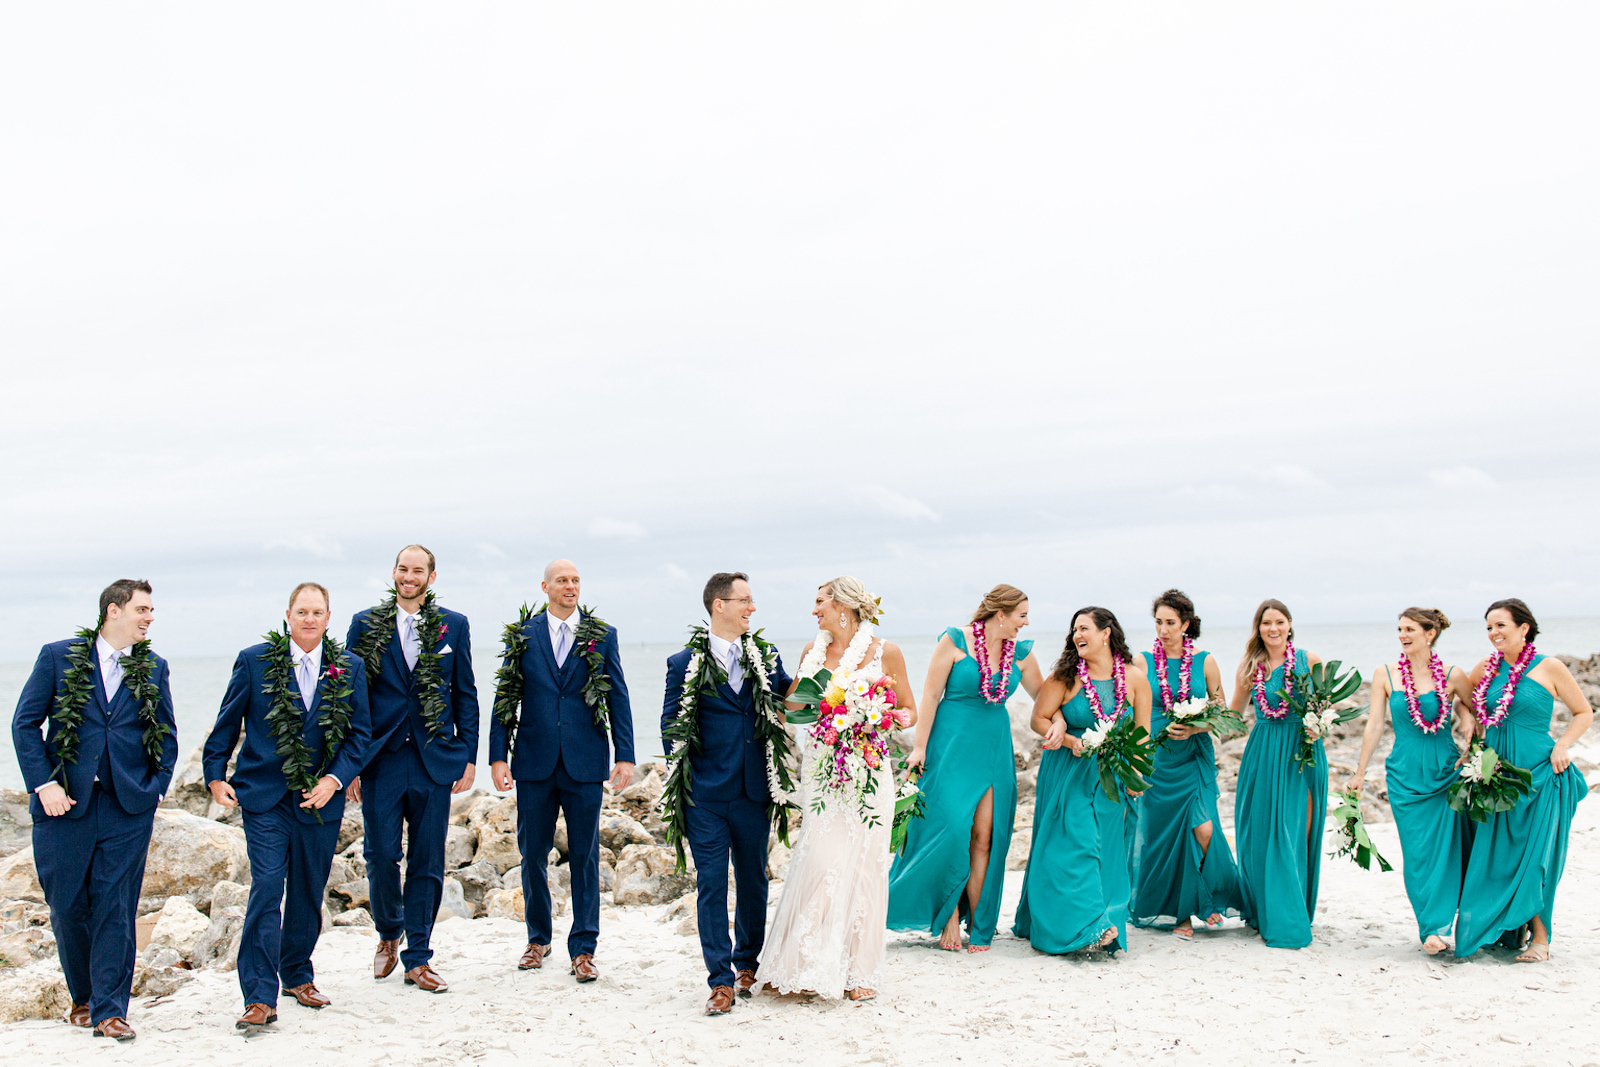 Tropical Elegant Wedding Party Photo on Clearwater Beach, Groomsmen in Blue Suits with Hawaiian Green Leaves Leis, Bride Holding Lush Colorful Floral Bouquet Wearing Lace Dress and All White Floral Leis, Bridesmaids Wearing Teal Mix and Match Dresses Wearing Hawaiian Purple Flower Leis | Tampa Bay Wedding Planner Special Moments Event Planning